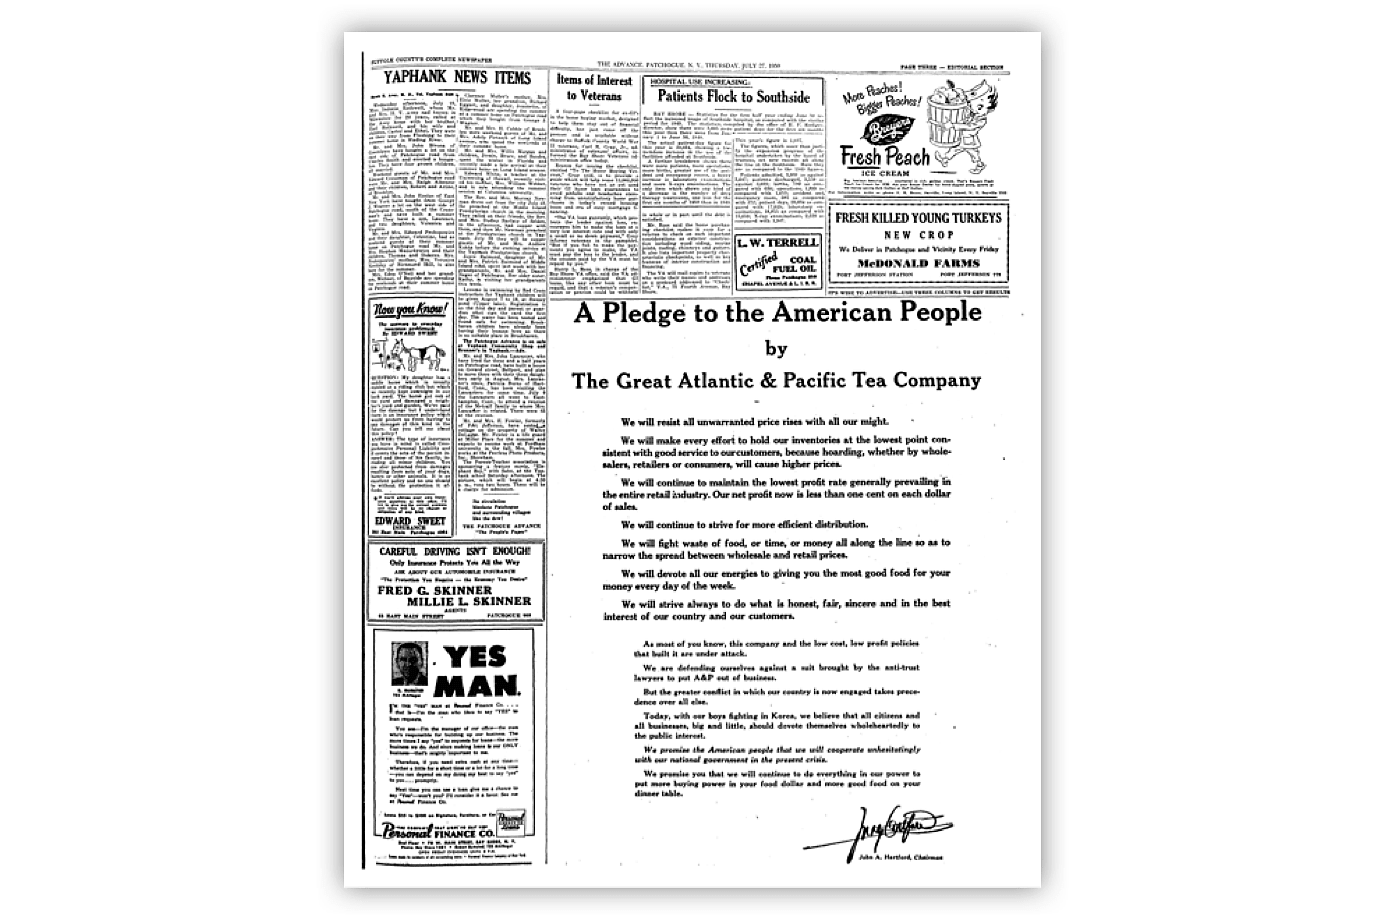 "A Pledge to the American People" A&P Newspaper Ad